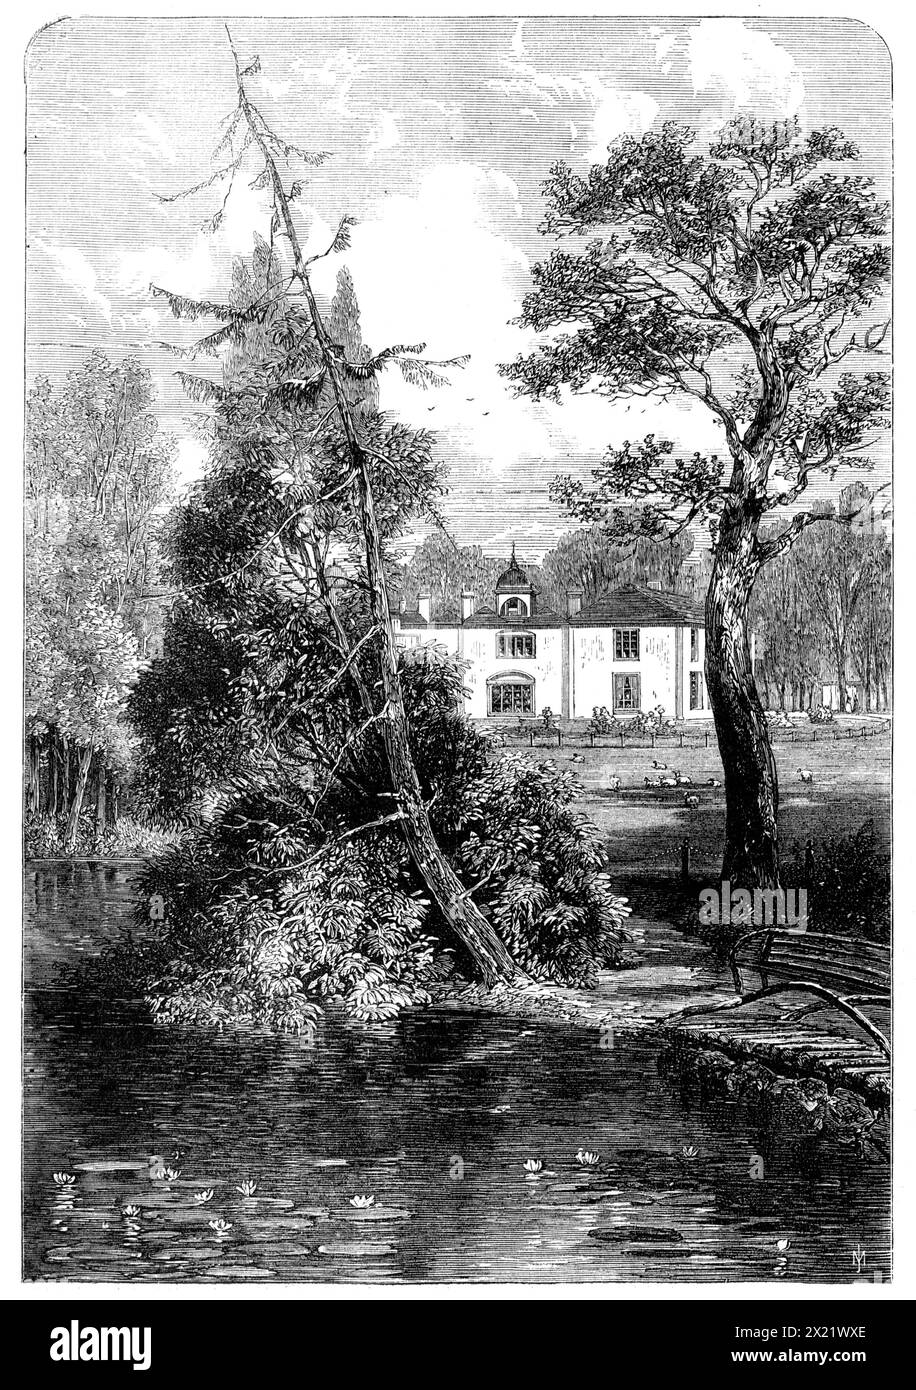 Heathfield House, near Birmingham, the residence of James Watt, 1865. View of '...the last residence of James Watt, Heathfield House, where he died, in 1819...the tower of his burial-place, Handsworth Church, is within sight of the house where he passed the closing years of his studious and useful life. Though in the vicinity of Birmingham, Heathfield House has all the character of a country gentleman's mansion. The estate is small; but the plantations, lawns, and walks, laid out by James Watt himself, are designed with great skill and taste. The present owner, Mr. J. W. Gibson Watt, takes car Stock Photo